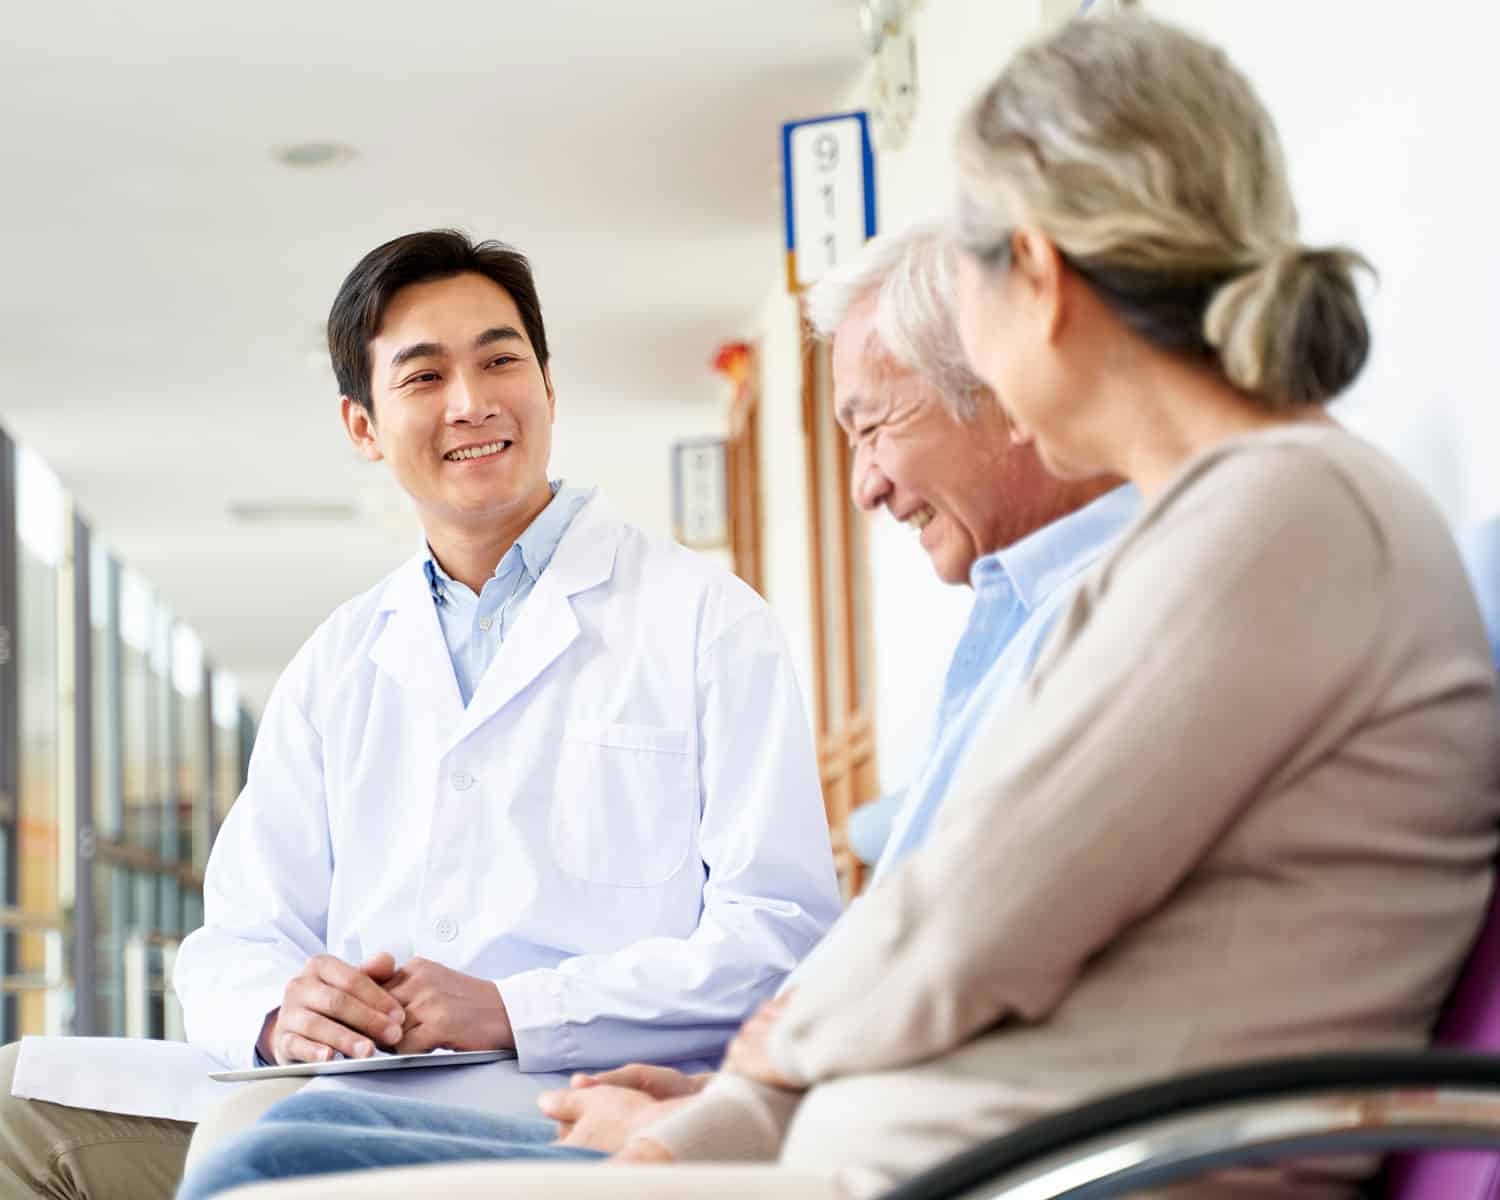 Doctor talking with patients